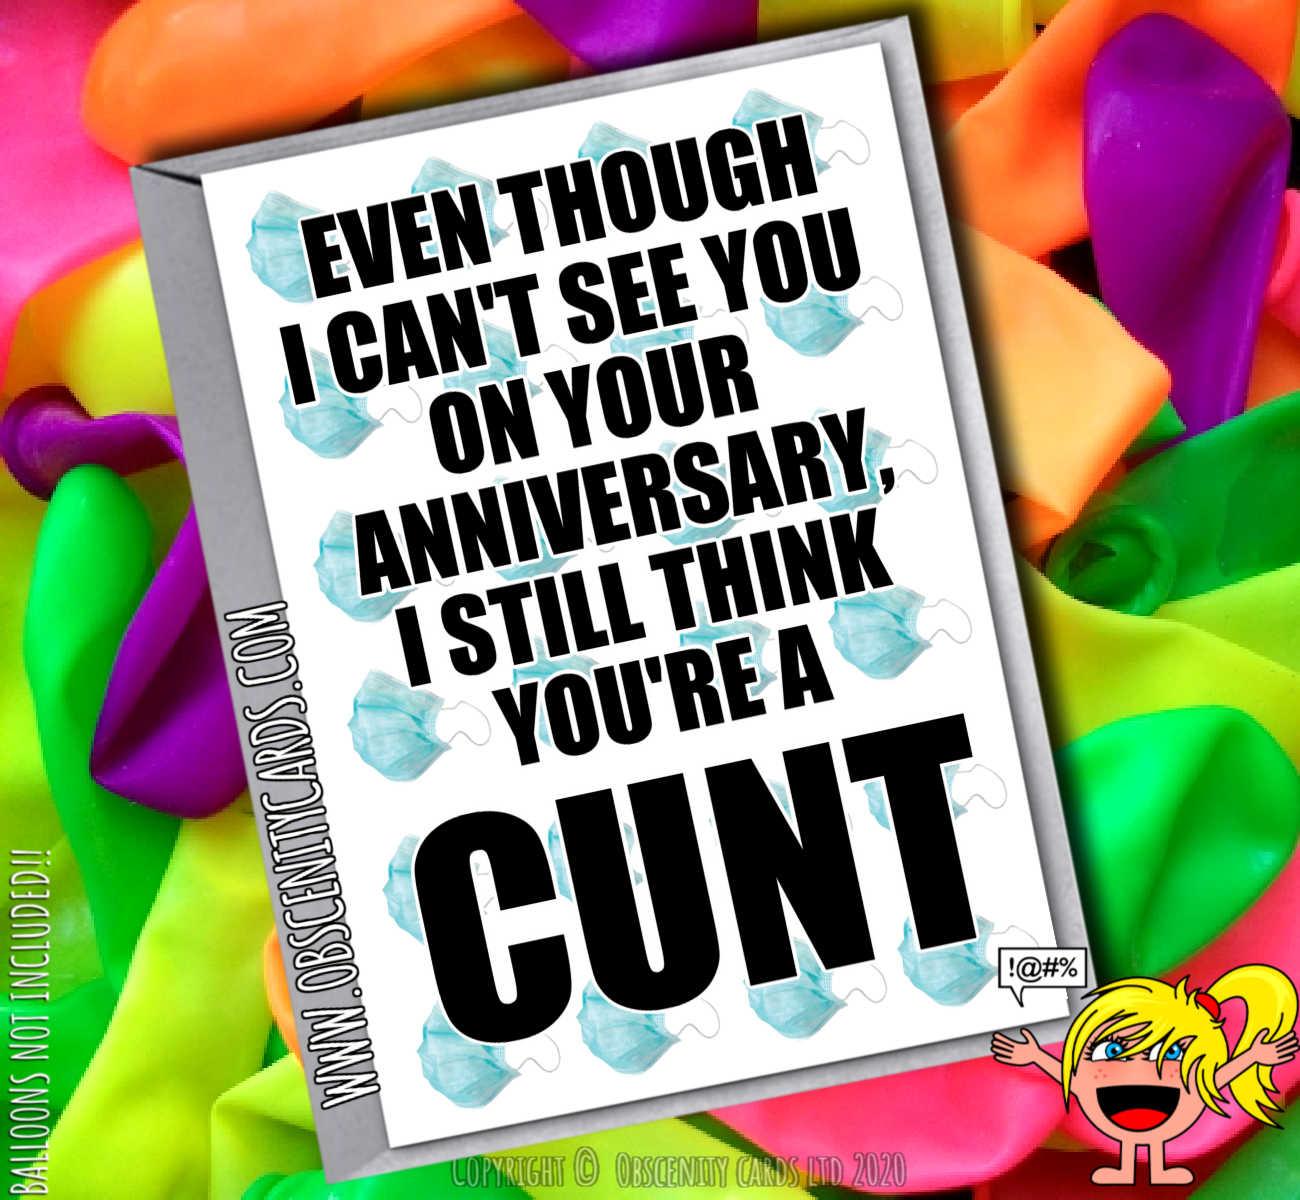 EVEN THOUGH I CAN'T SEE YOU ON YOUR ANNIVERSARY, I STILL THINK YOU'RE A CUNT SELF ISOLATION CARD